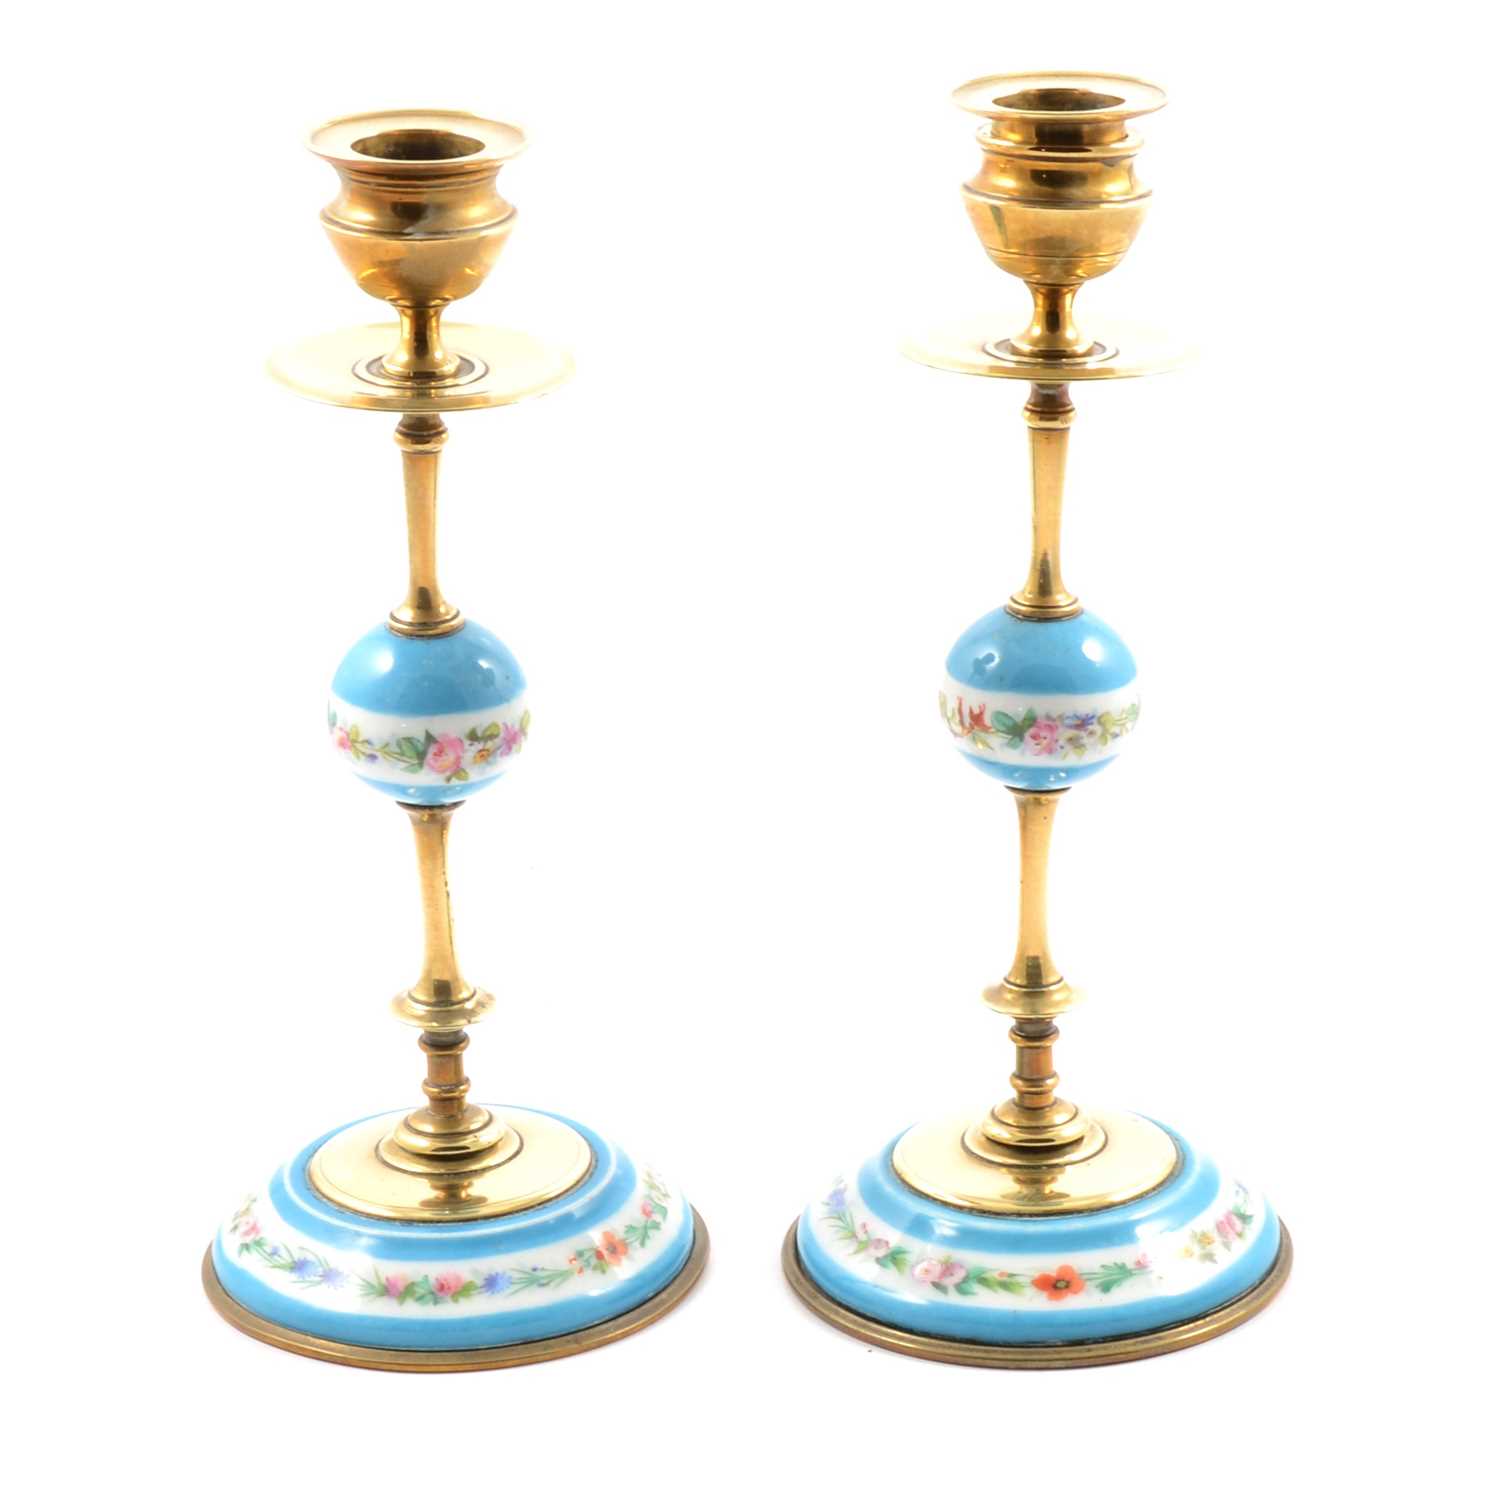 Lot 22 - A pair of brass candlesticks with pale blue ceramic detail.